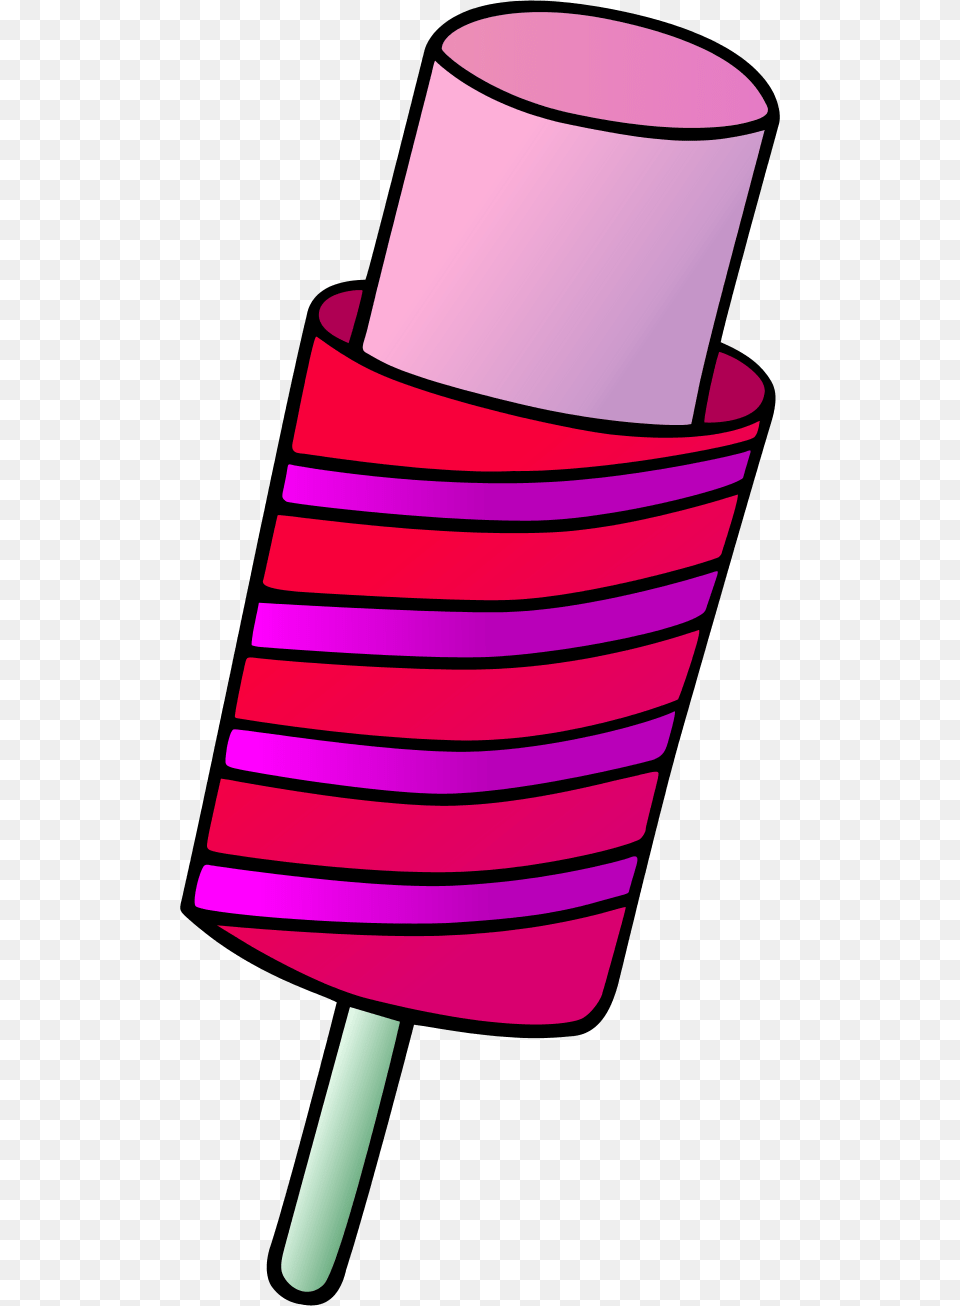 Stripped Ice Cream Ice Cream Cone, Food, Sweets, Dynamite, Weapon Png